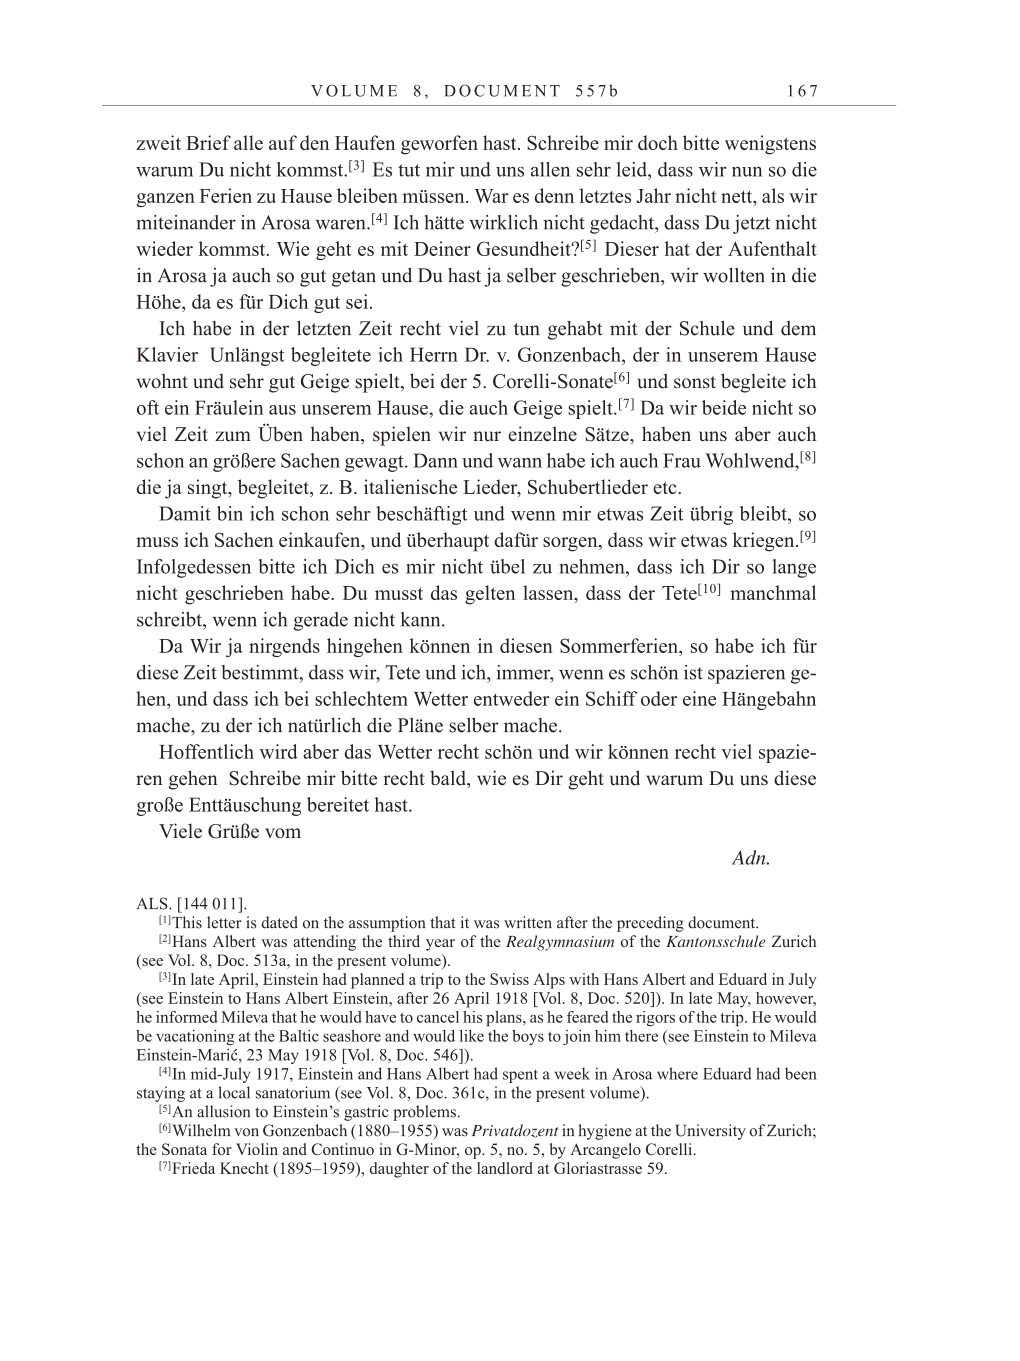 Volume 10: The Berlin Years: Correspondence May-December 1920 / Supplementary Correspondence 1909-1920 page 167